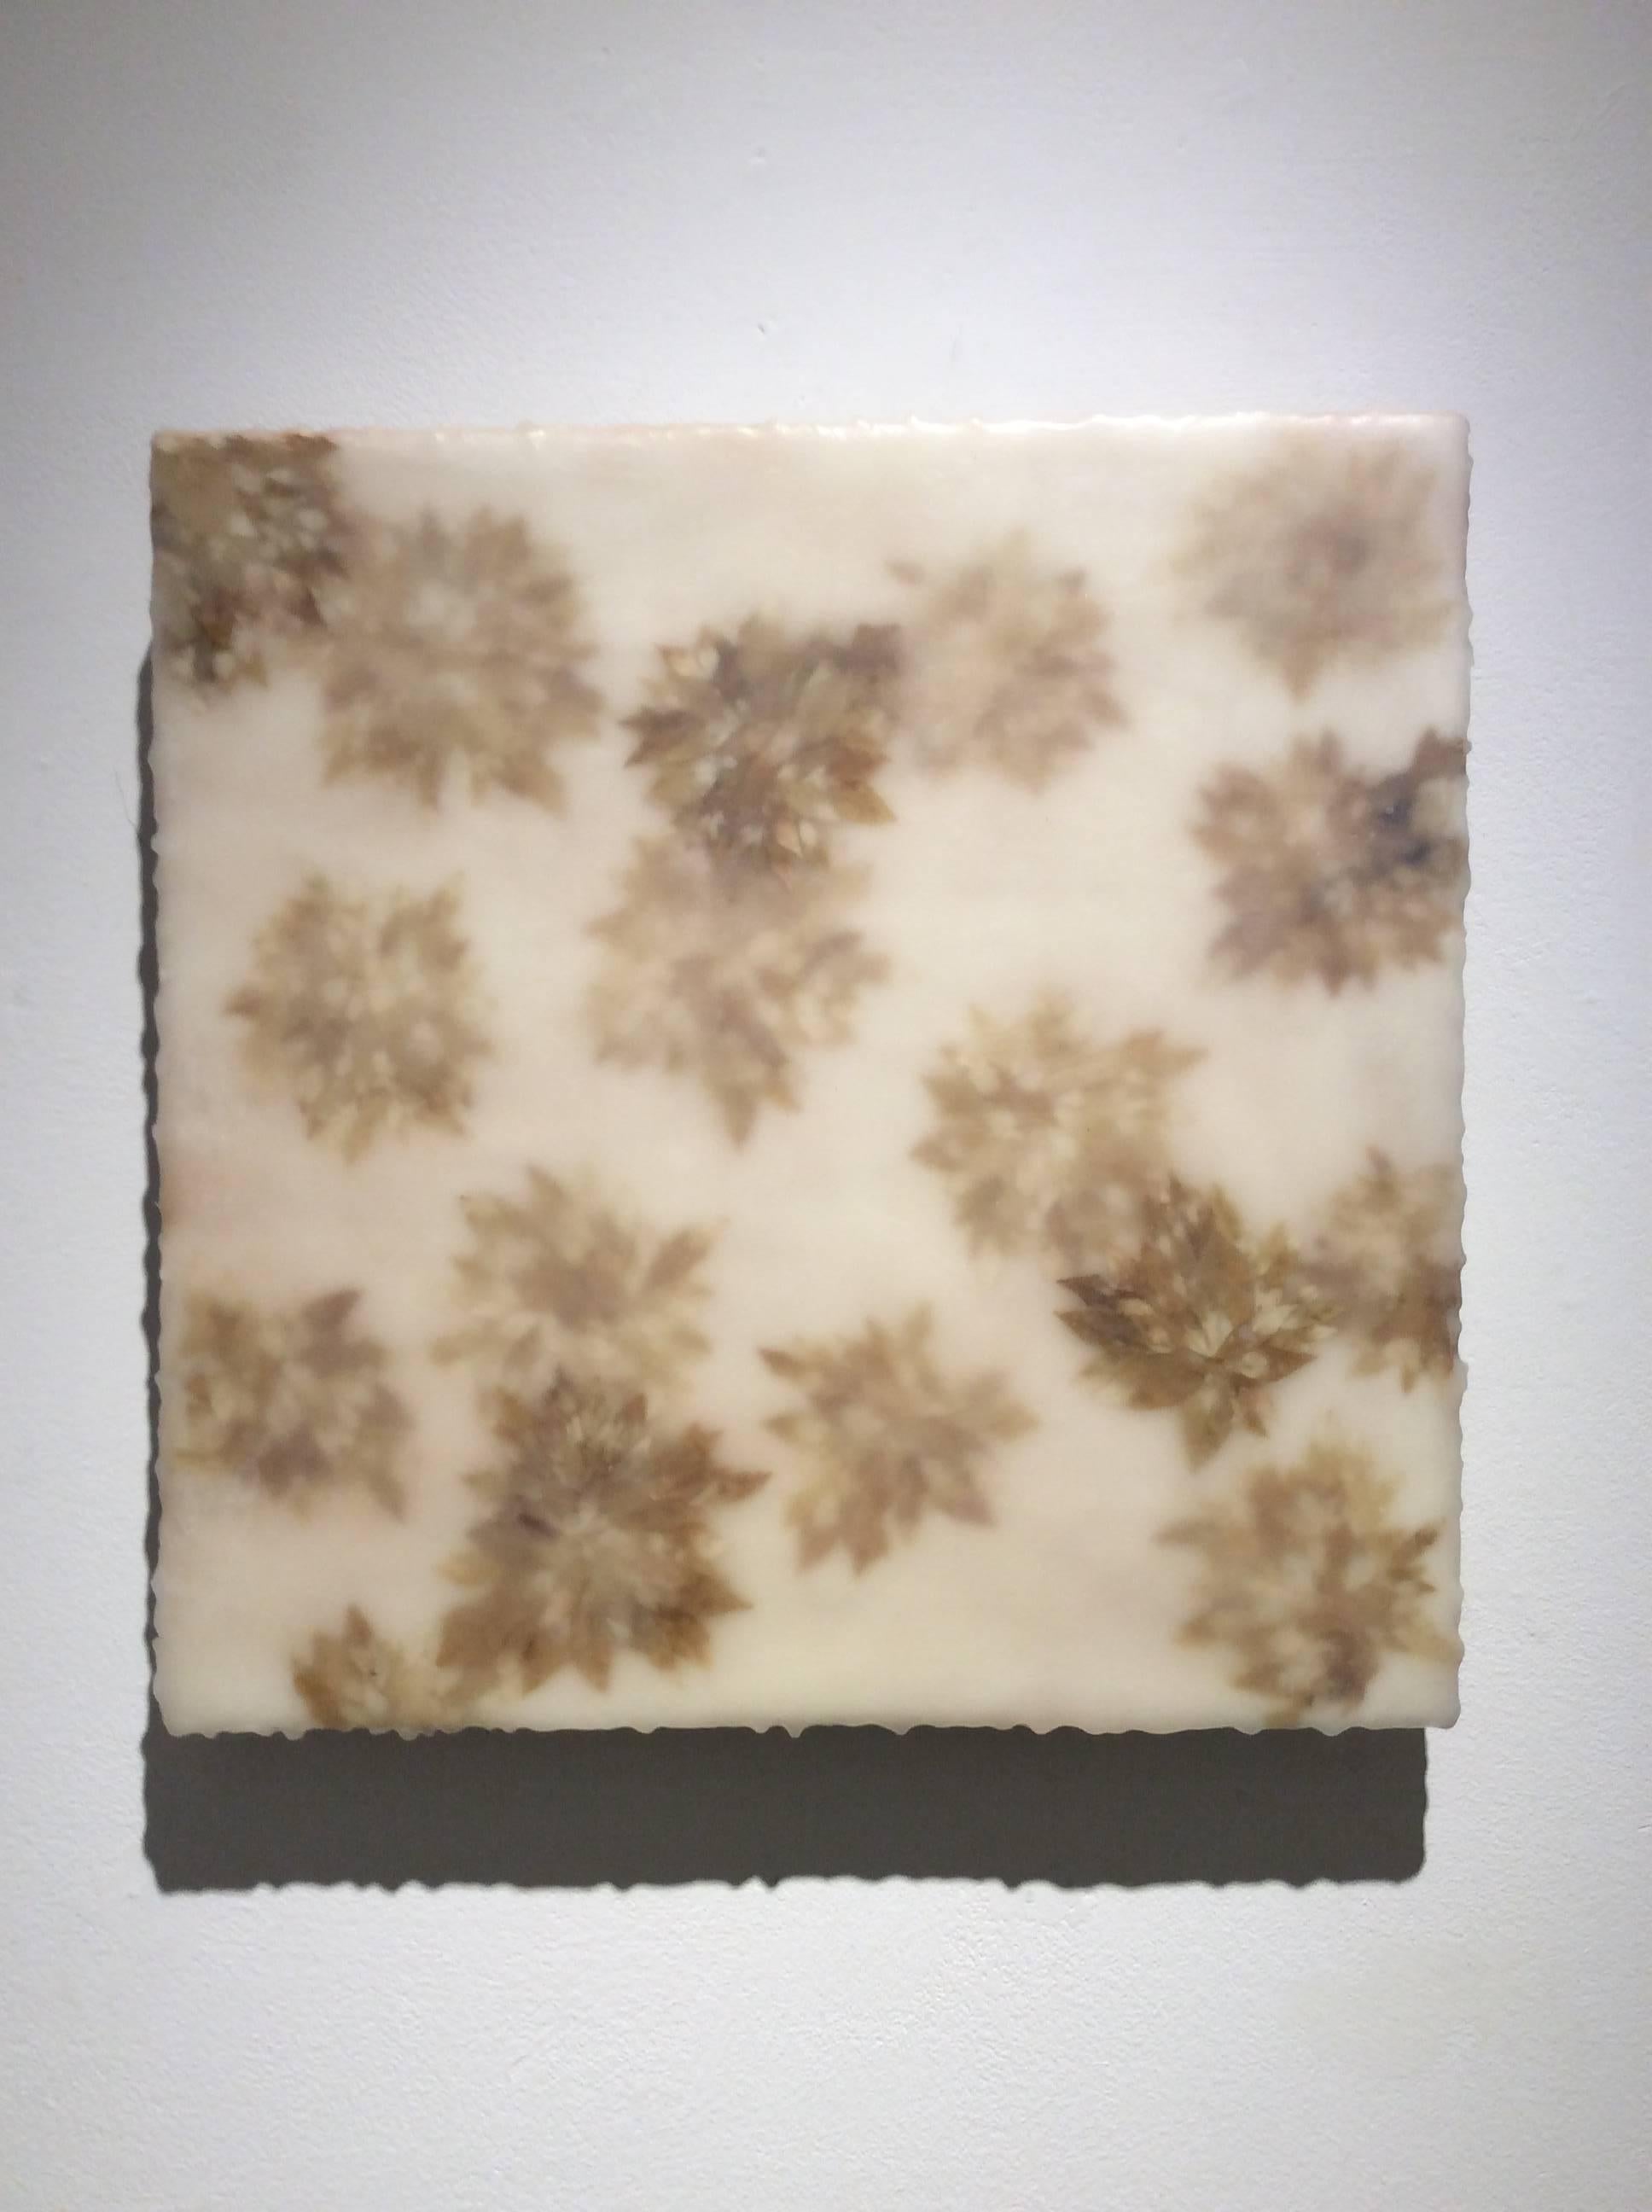 Abstract encaustic painting on wood panel of beige spurge leaves in a decorative arrangement on white
14 x 14 inches 

This modern abstract encaustic painting by Allyson Levy is made with assorted brown and beige spurge leaves encased in encaustic.